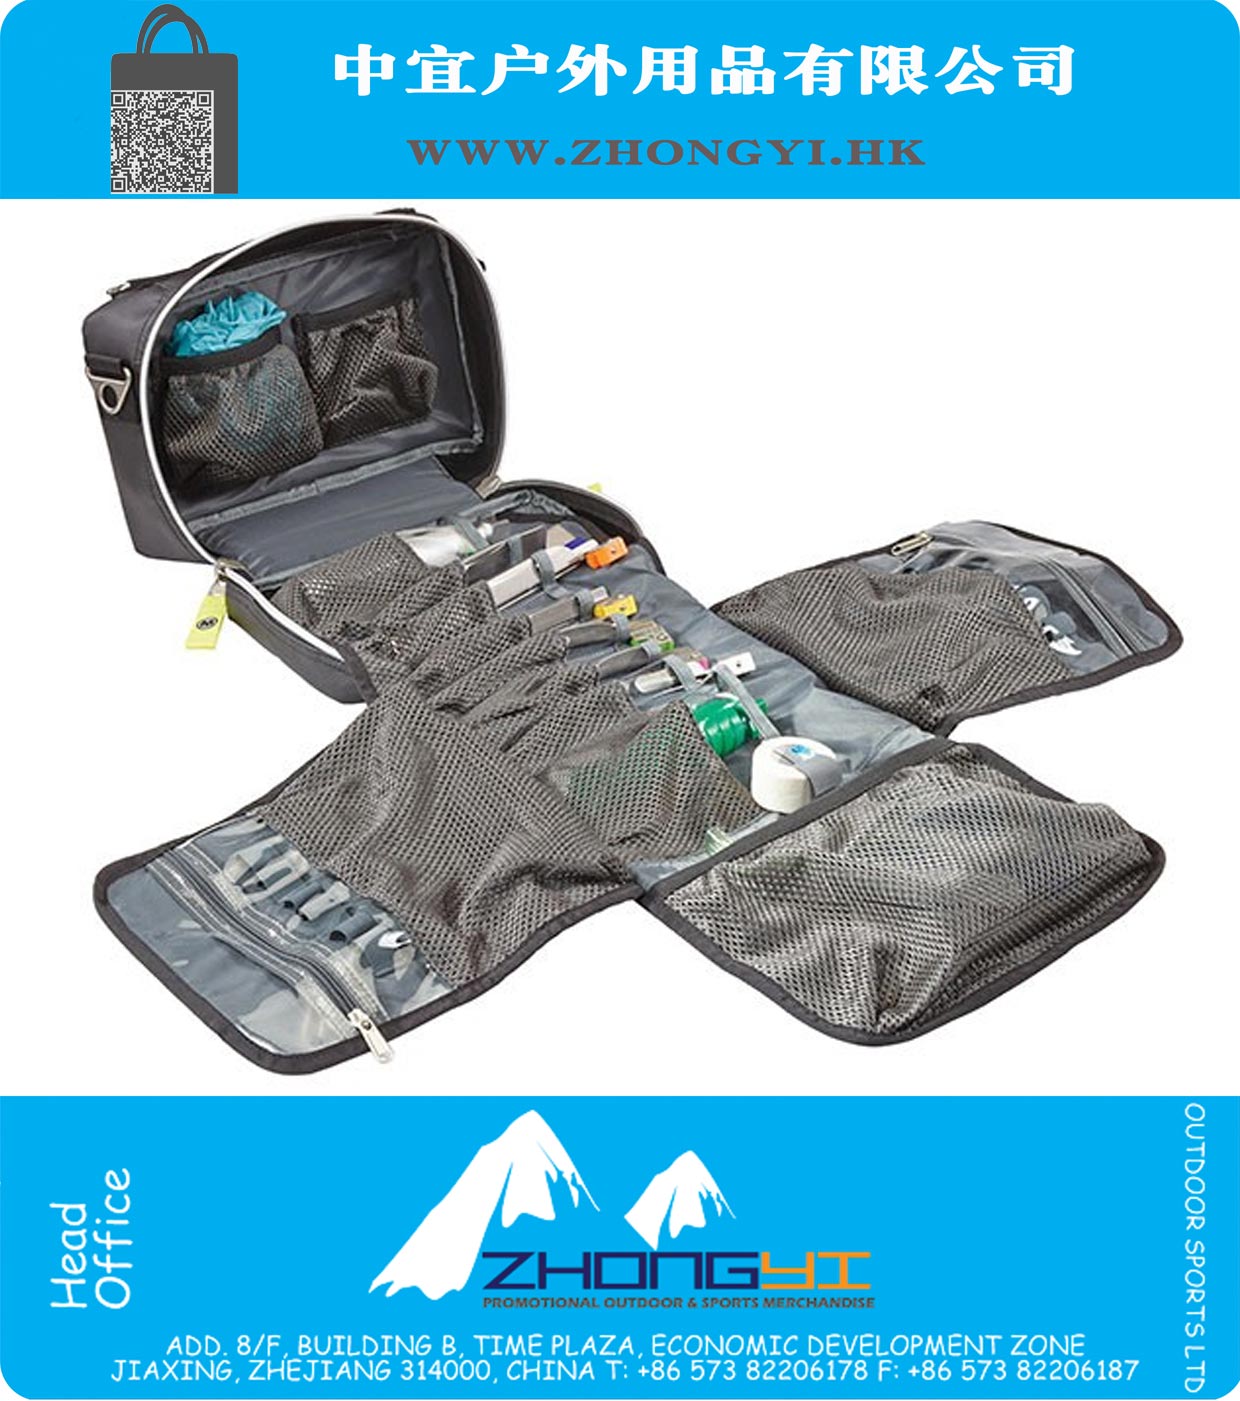 Airway Intubation Tri-Fold Infection Control Module Case